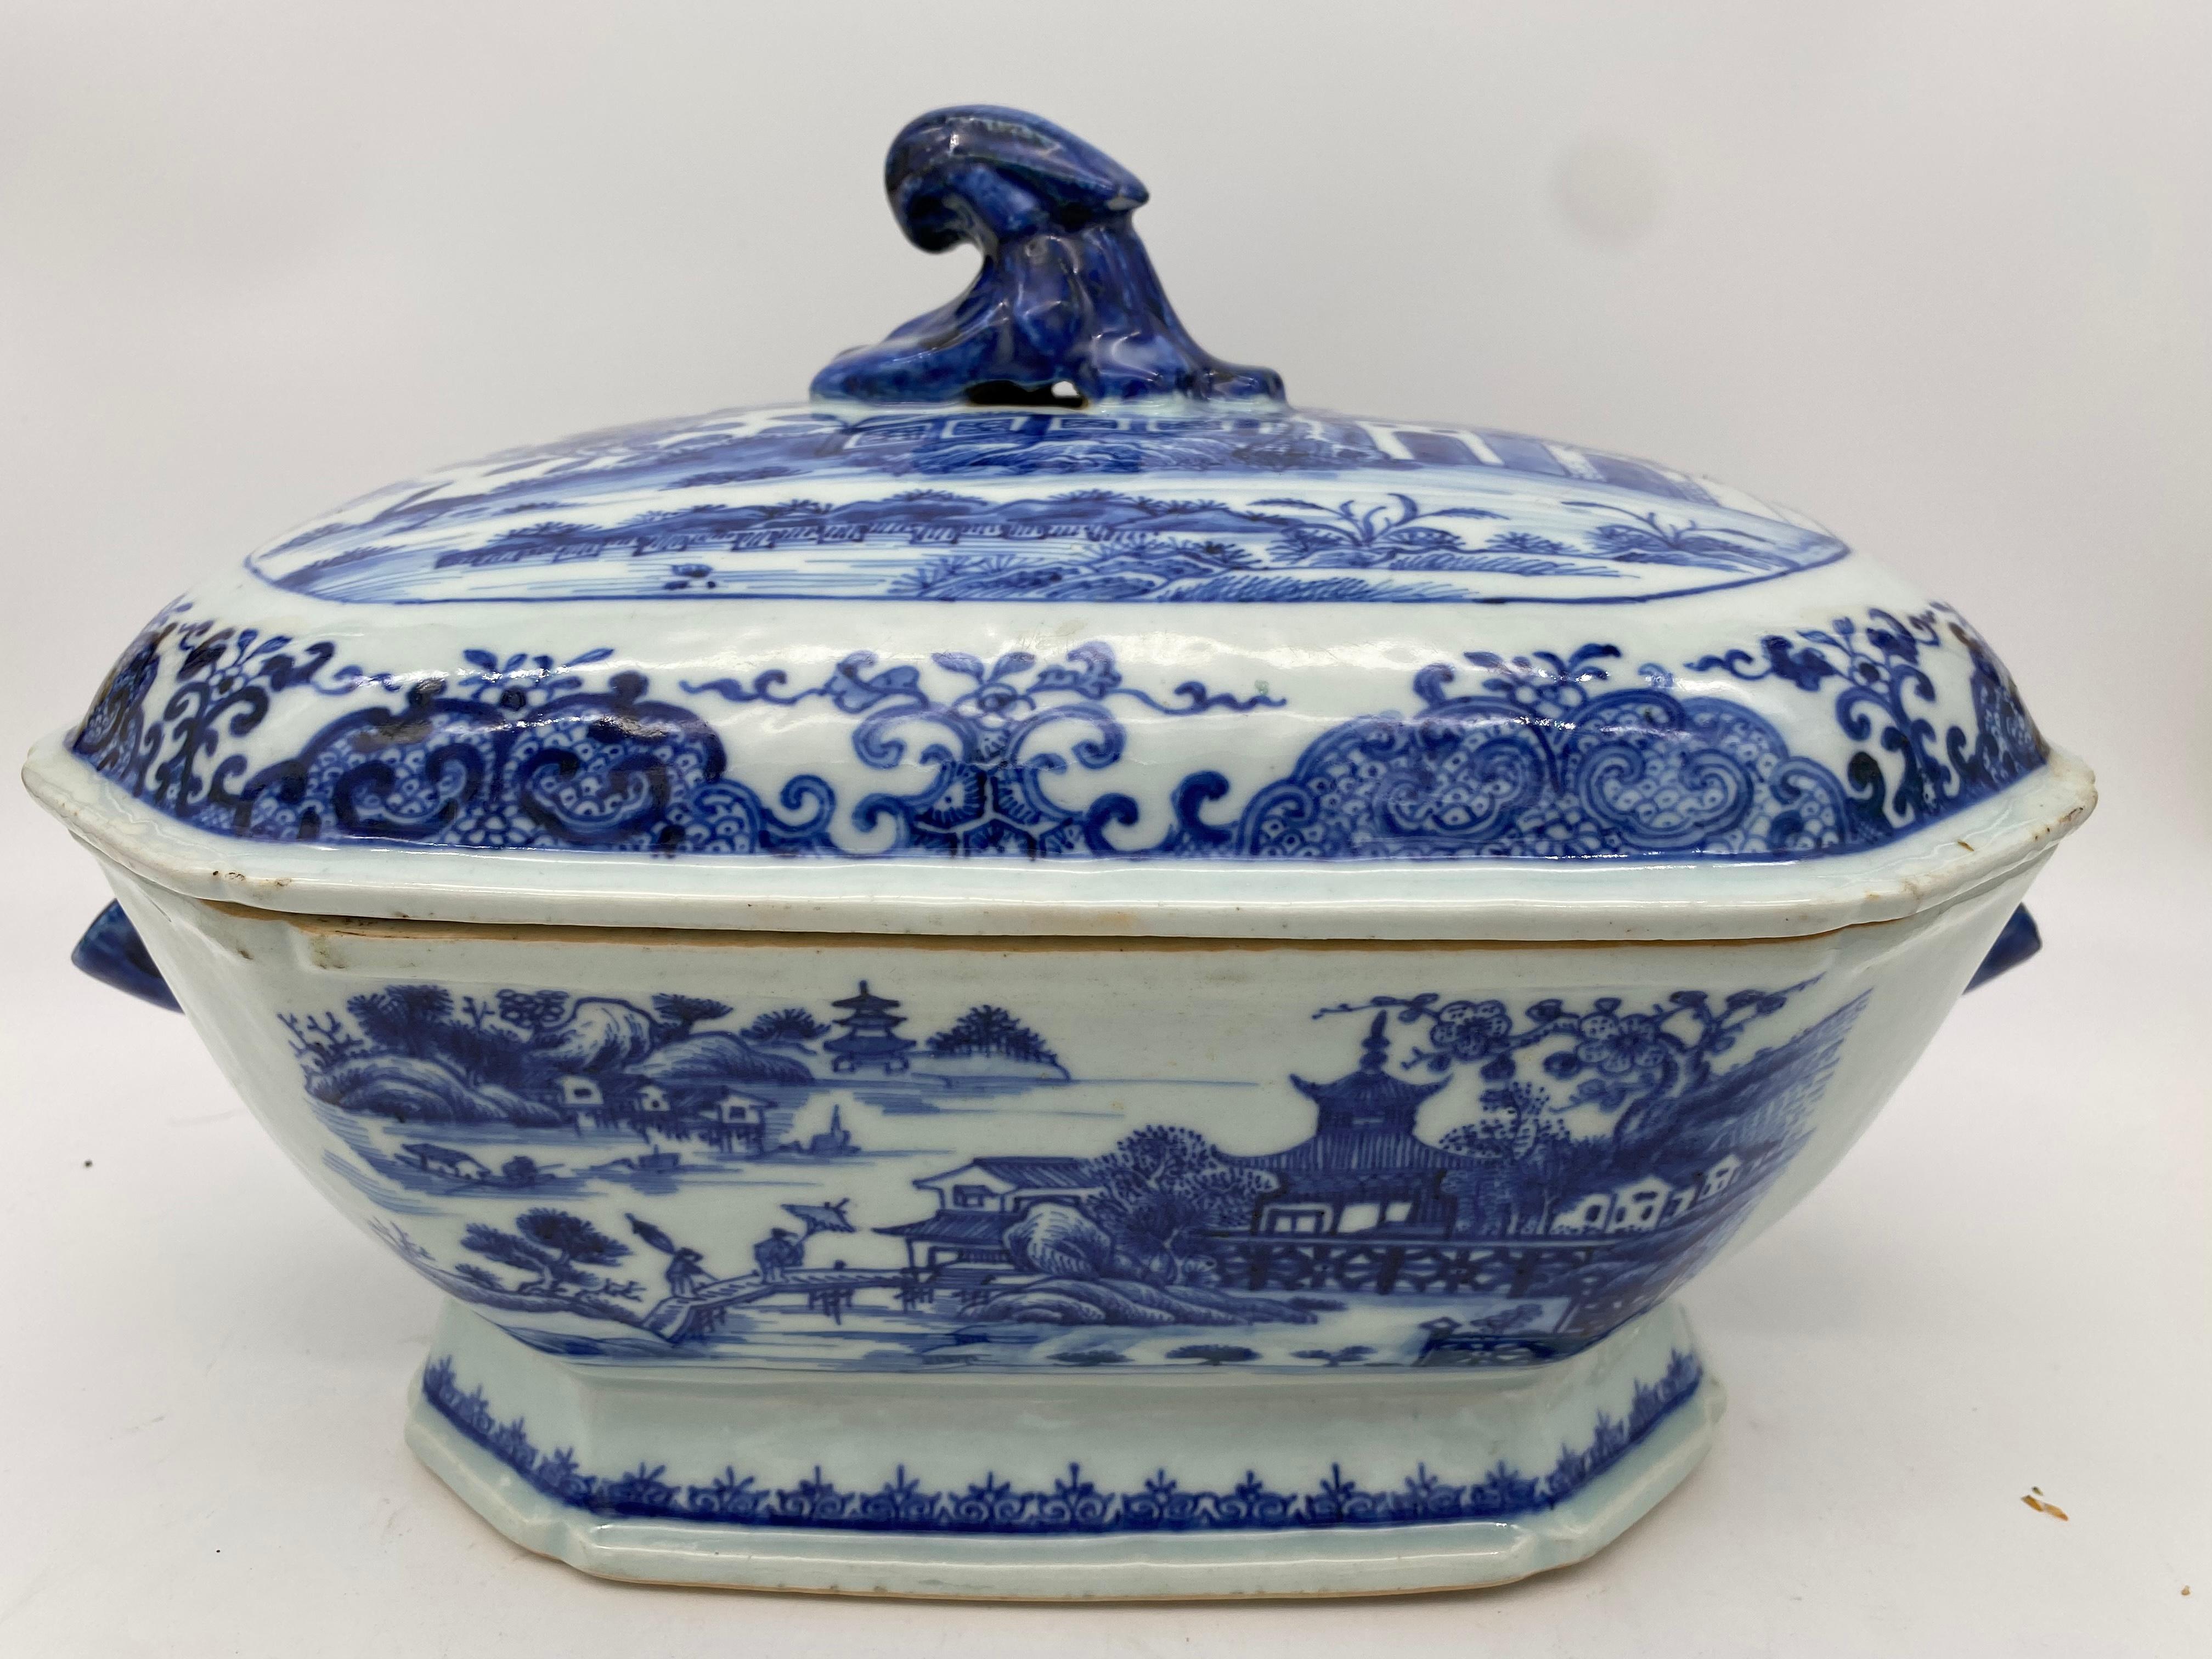 18th century 36cm blue and white Chinese porcelain tureen cover, with rock form scrolling handle to lid and lotus pods to the base, decorated with scenes of buildings in formal gardens, with foliate borders. Measures: 14” x 8.75” x 10” high.